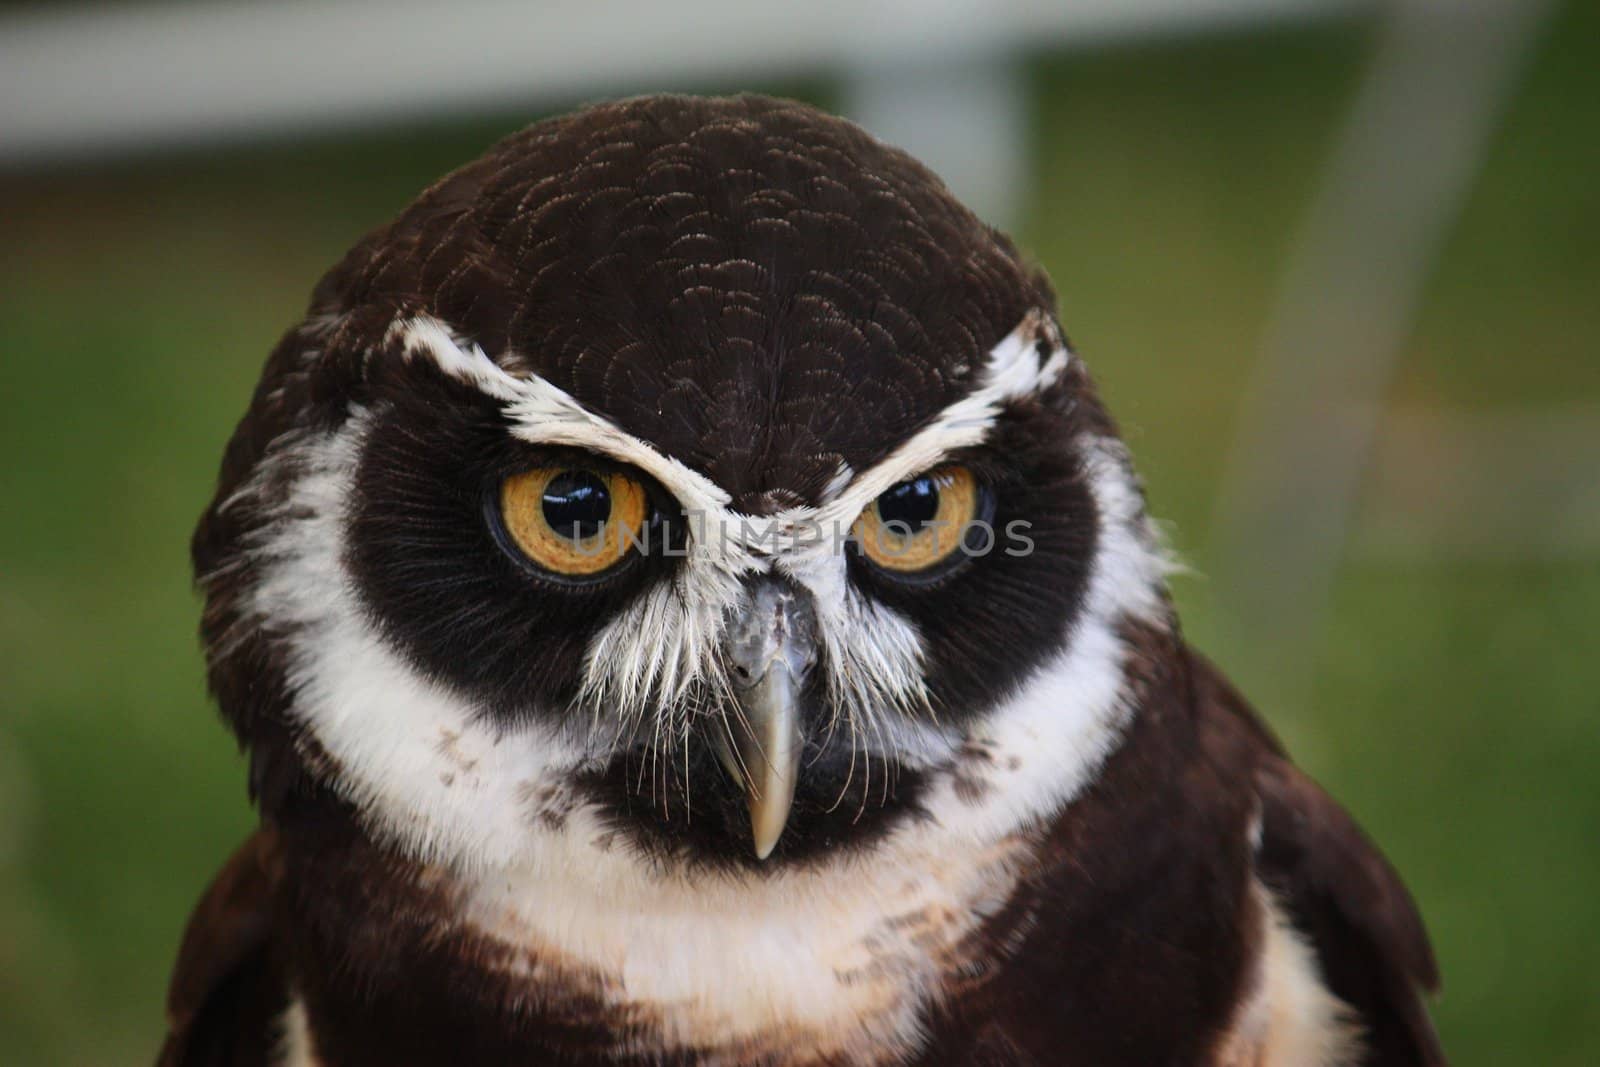 A cute spectacled owl